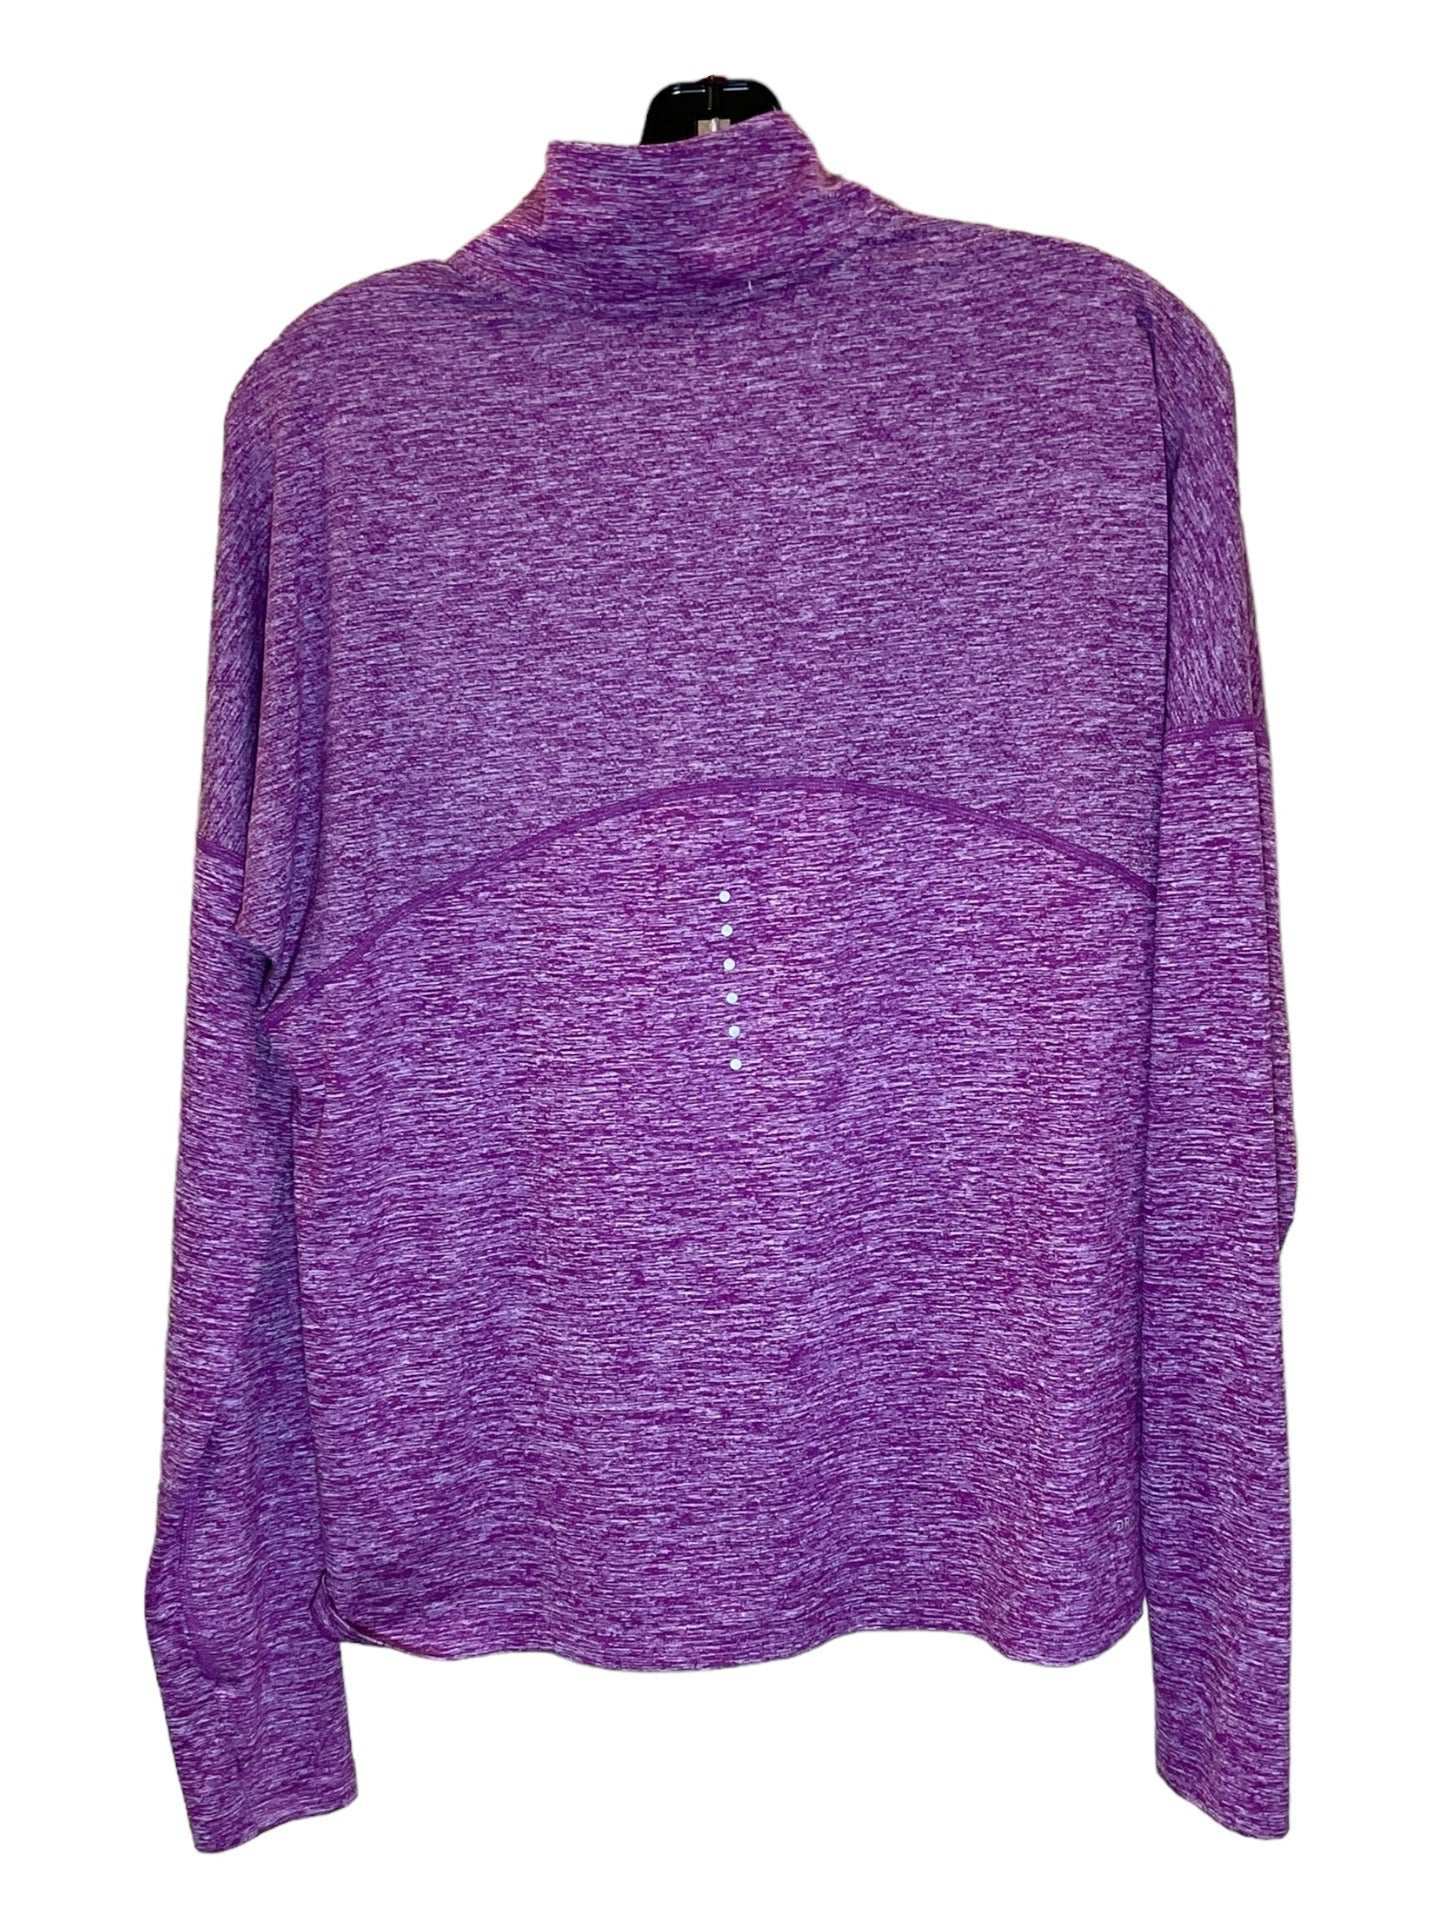 Lavender Athletic Top Long Sleeve Collar Nike Apparel, Size M